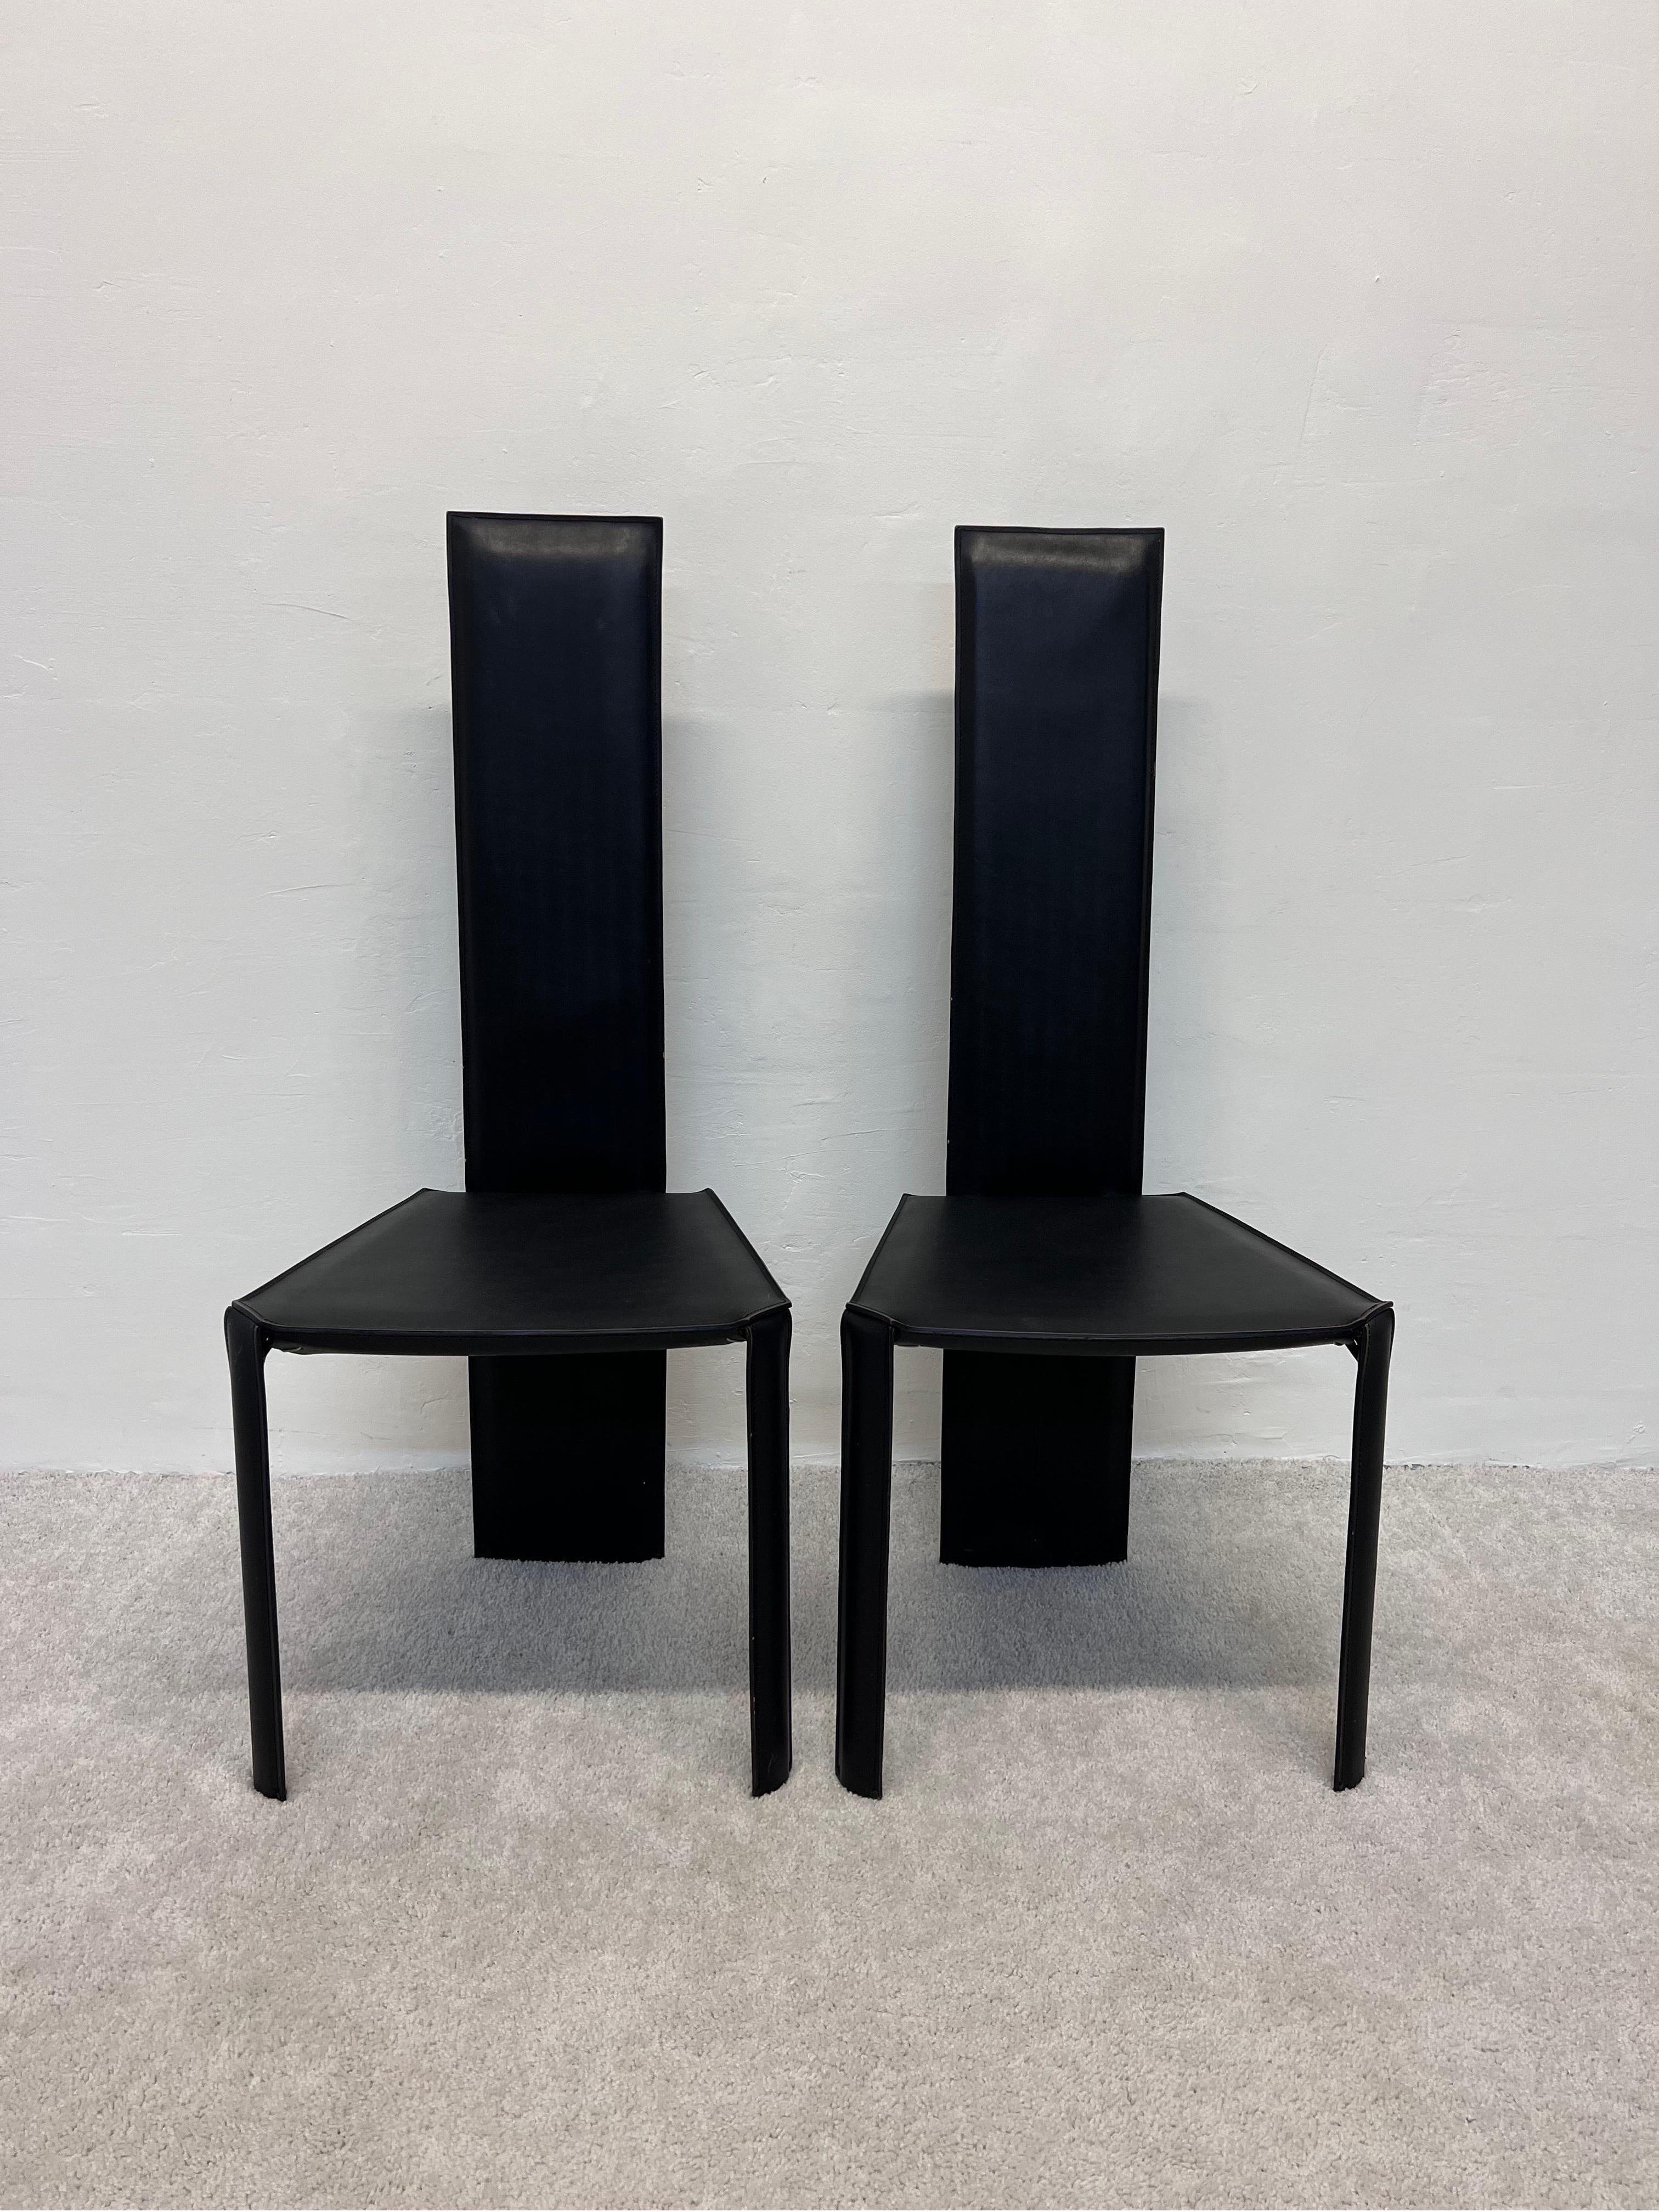 Pair of Brazilian postmodern black hand stitched matte black leather dining chairs by Ligne Roset, Brazil 1980s. Both chairs maintain original labels.

 